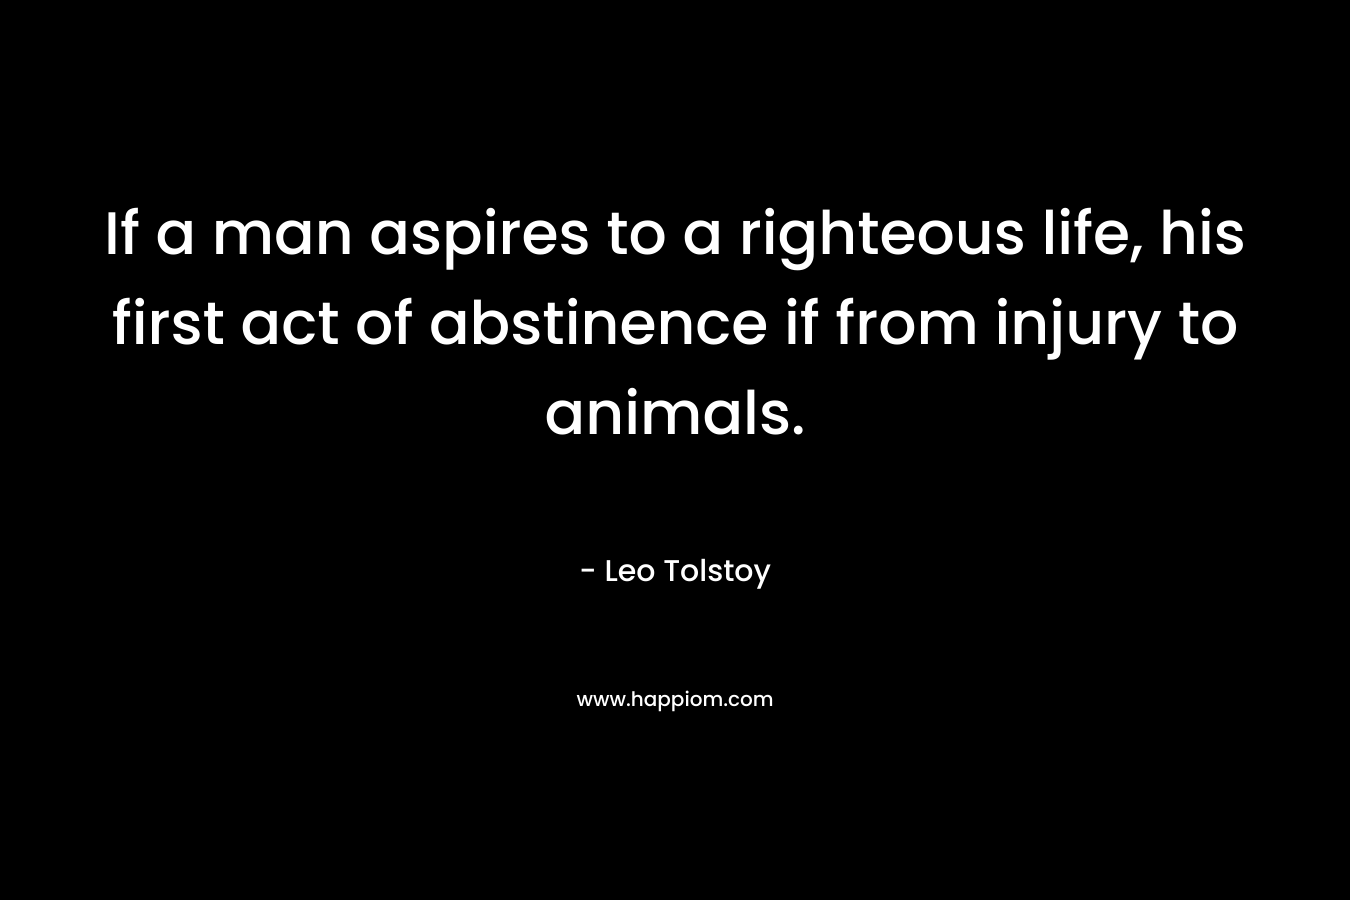 If a man aspires to a righteous life, his first act of abstinence if from injury to animals.